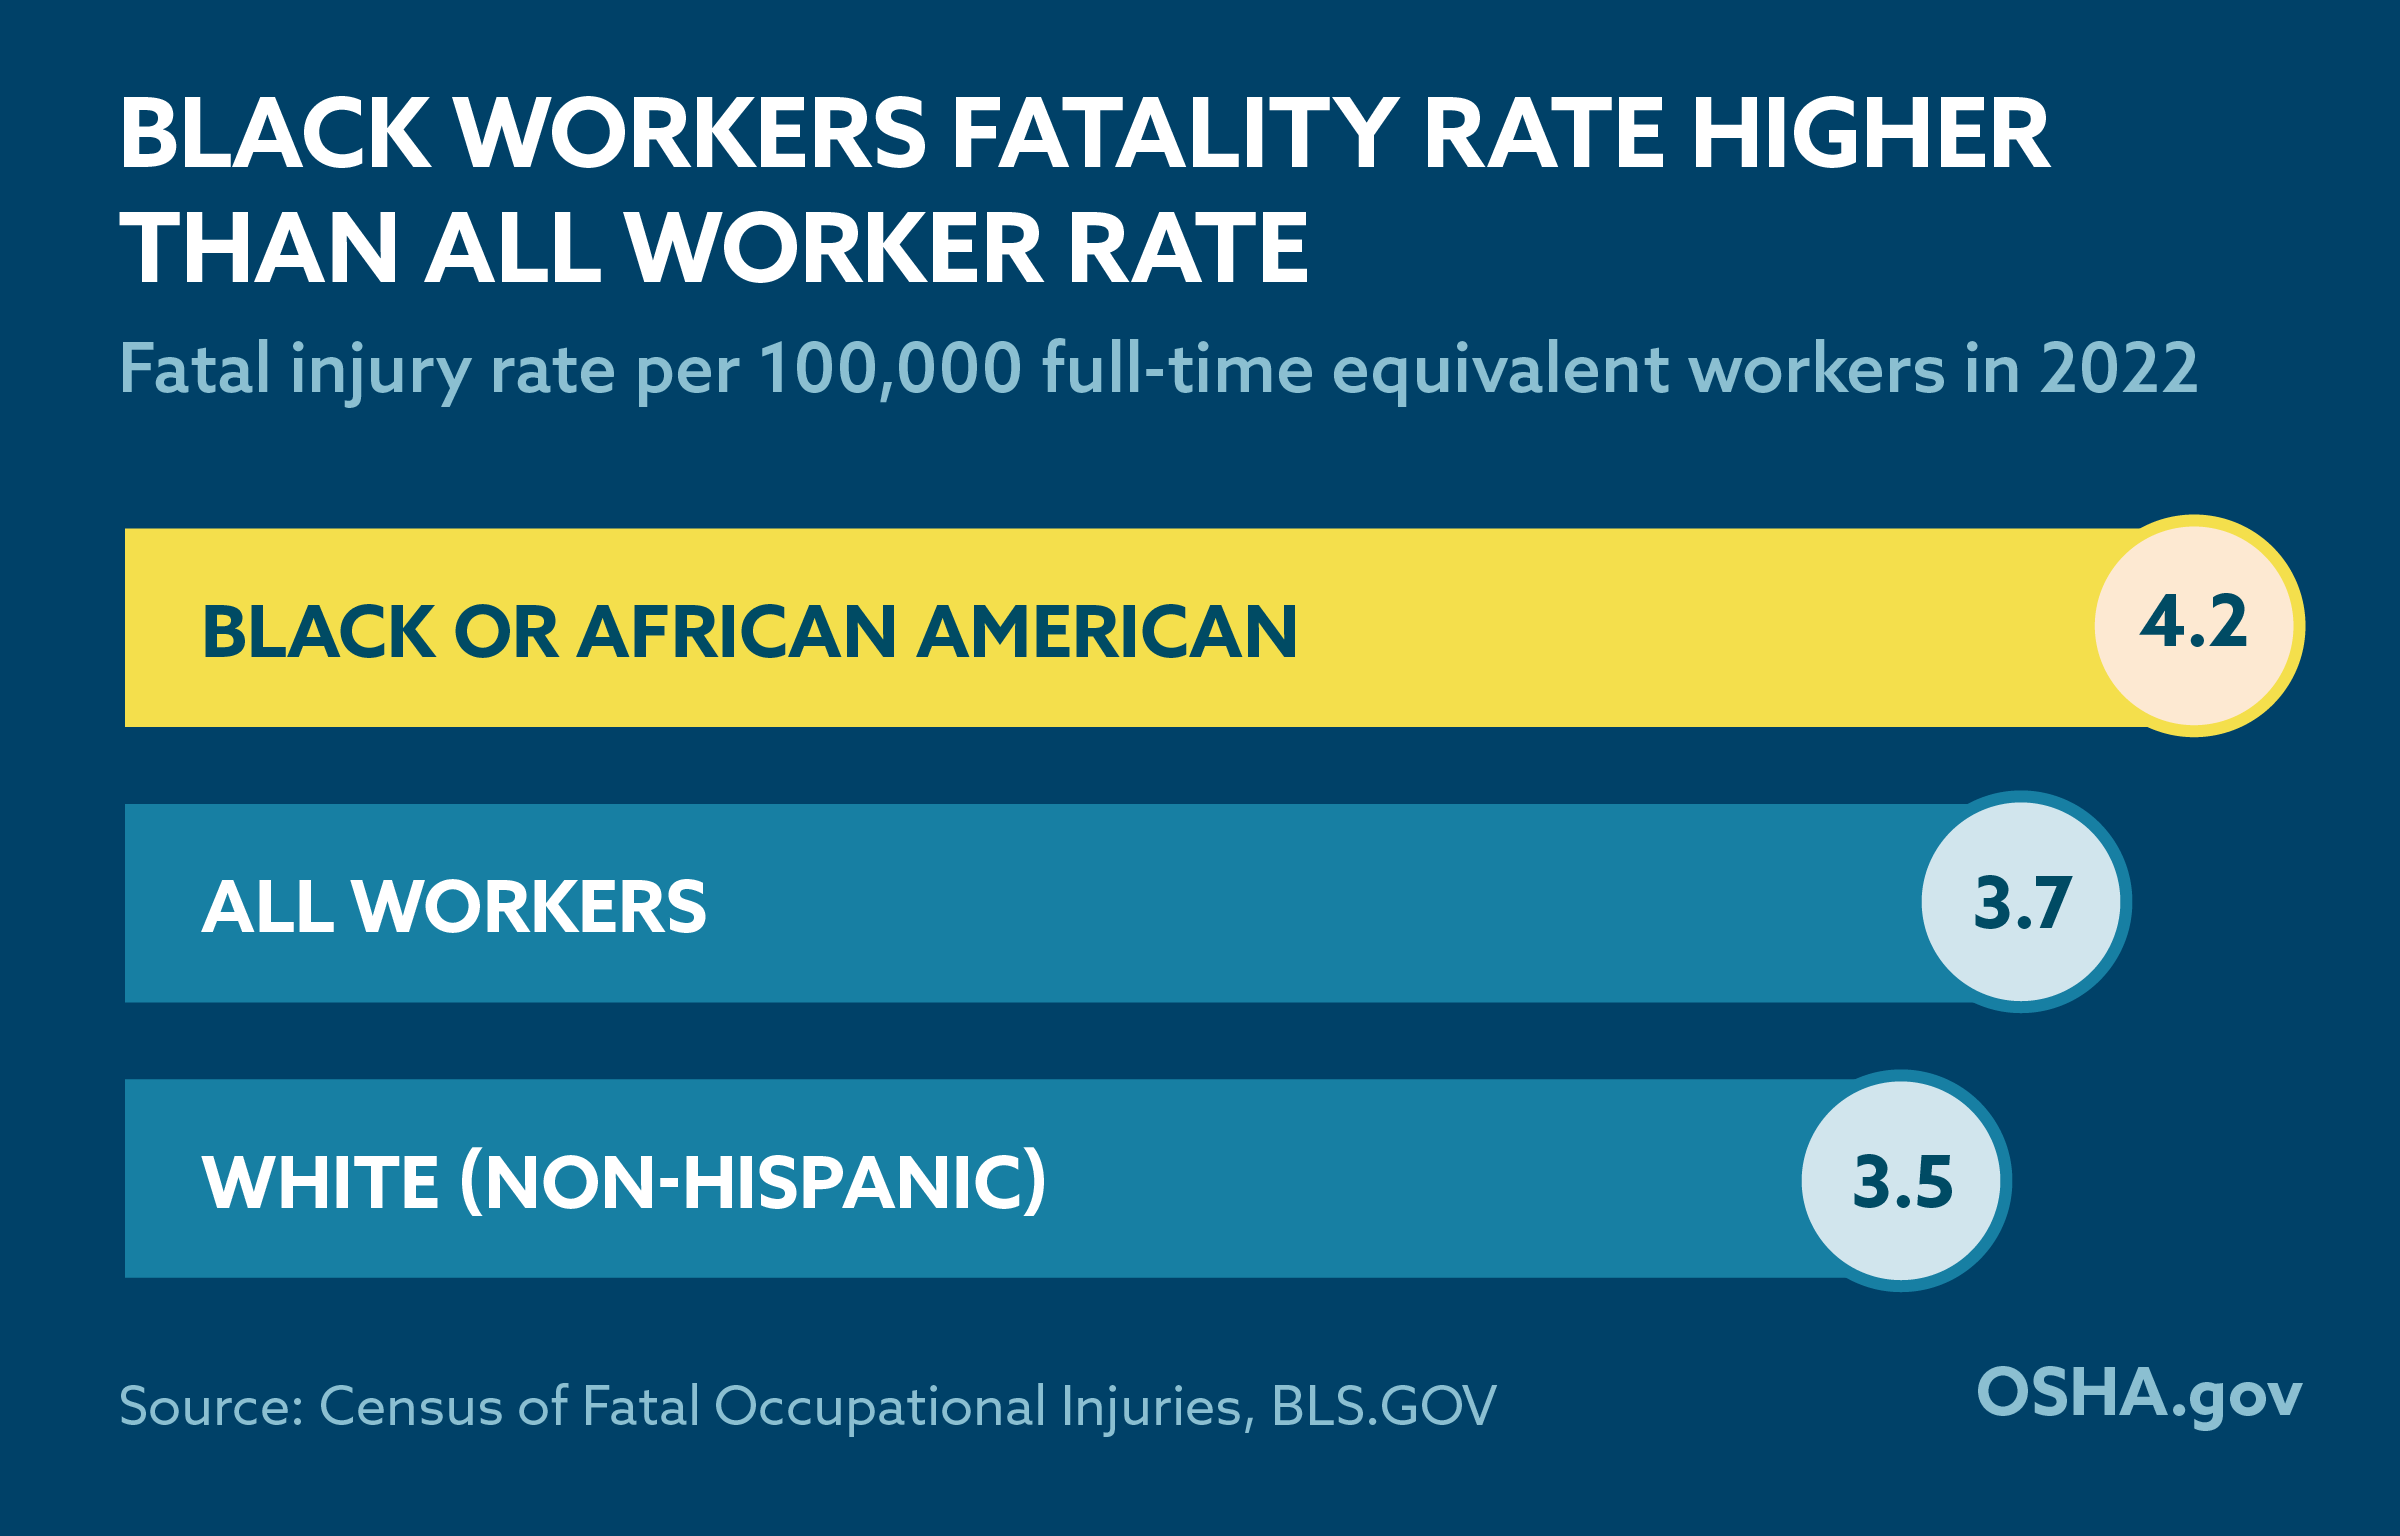 Chart showing that the fatality rate for Black workers is 4.2 per 100,000 full-time workers in 2022. The rate for all workers was 3.7. It was 3.5 for white, non-Hispanic workers. Source: Census of Fatal Occupational Injuries, BLS.gov